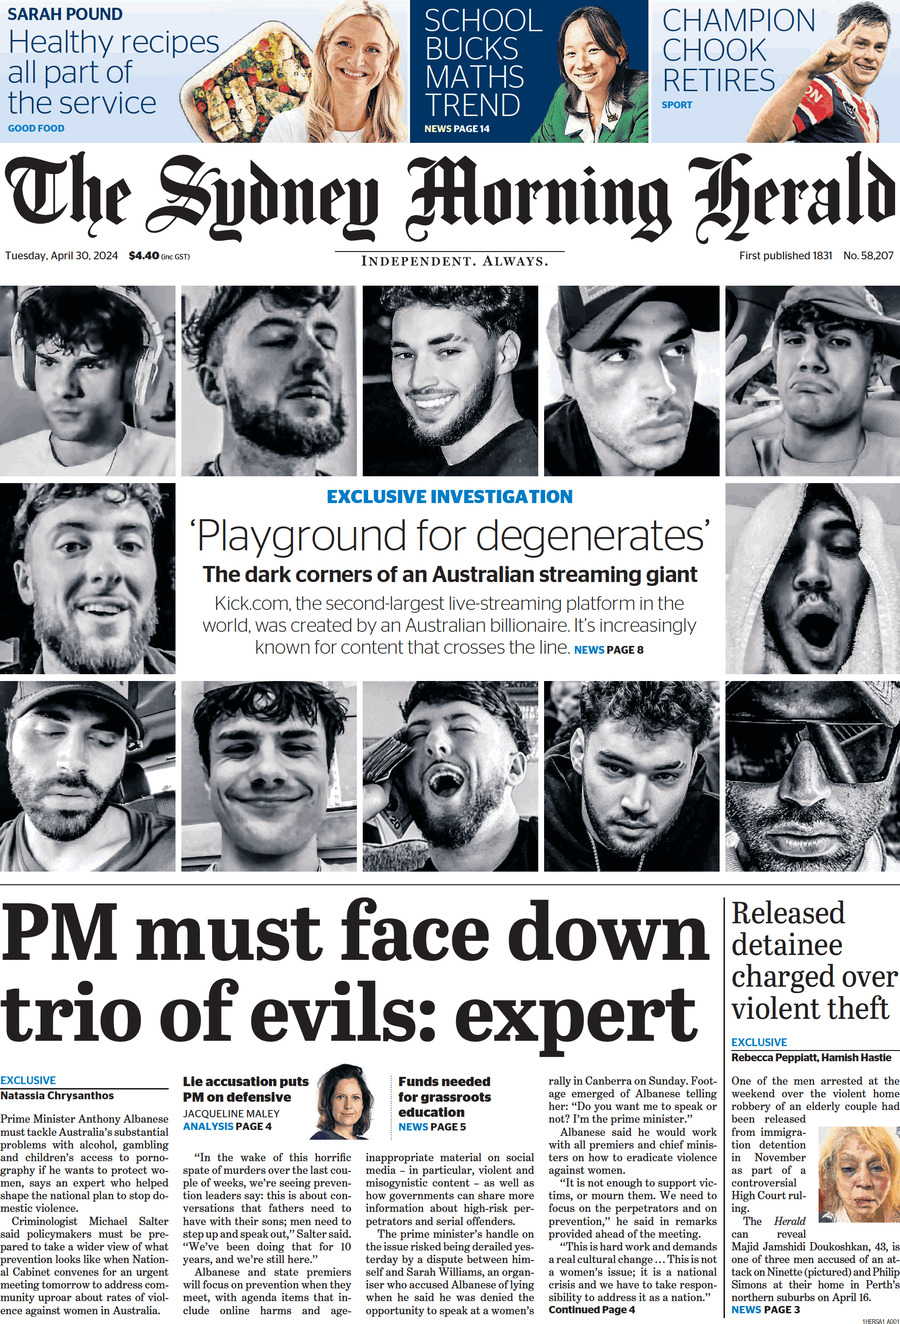 The Sydney Morning Herald - Front Page - 04/30/2024